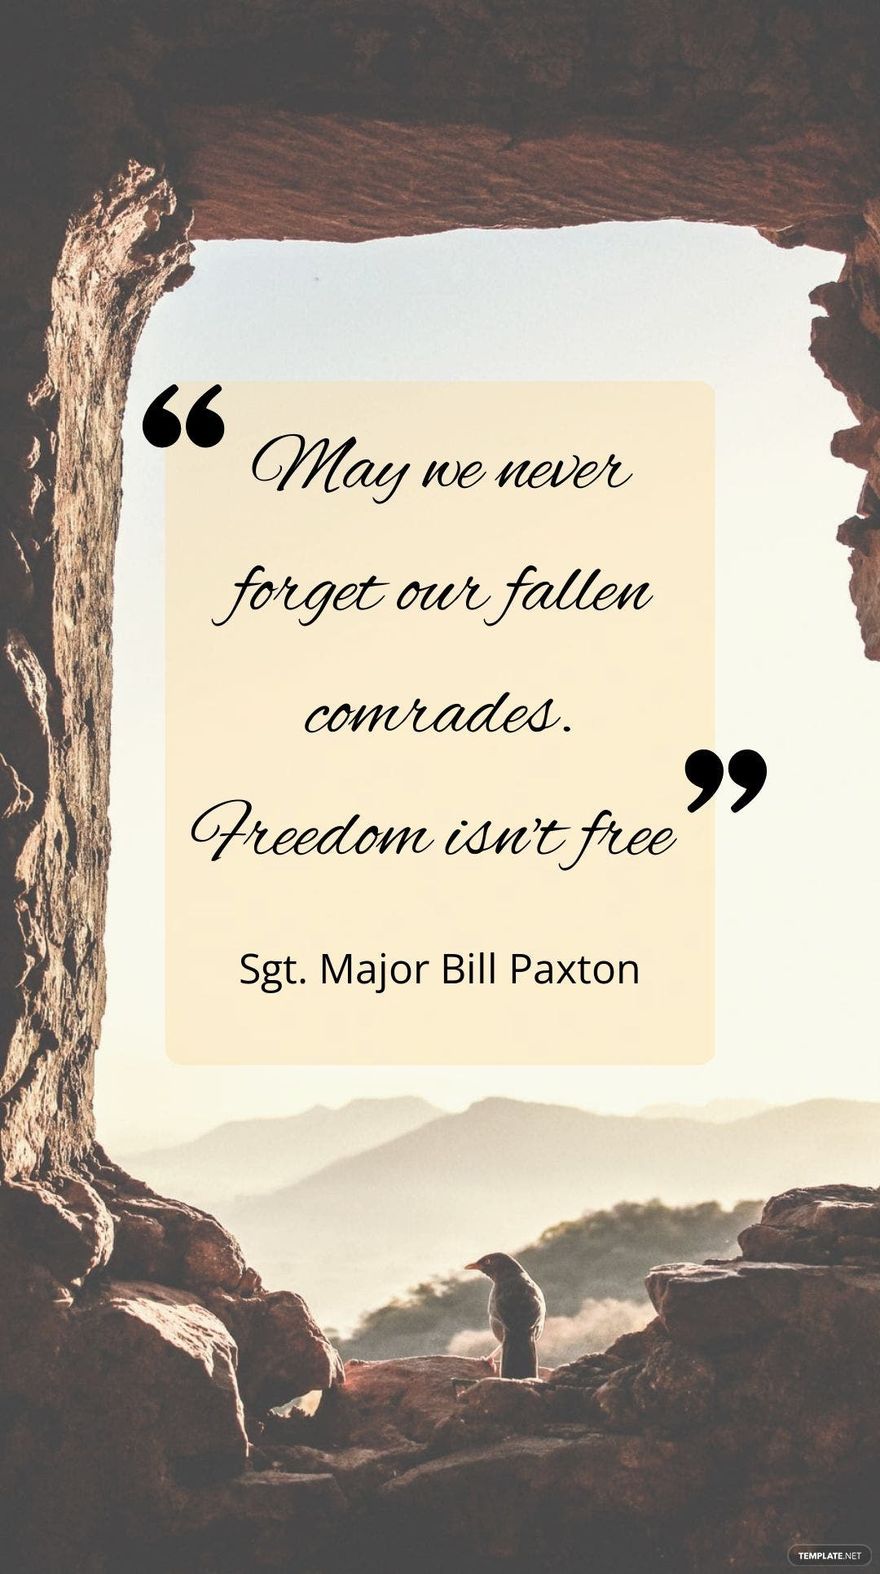 Sgt. Major Bill Paxton - May we never forget our fallen comrades. Freedom isn't